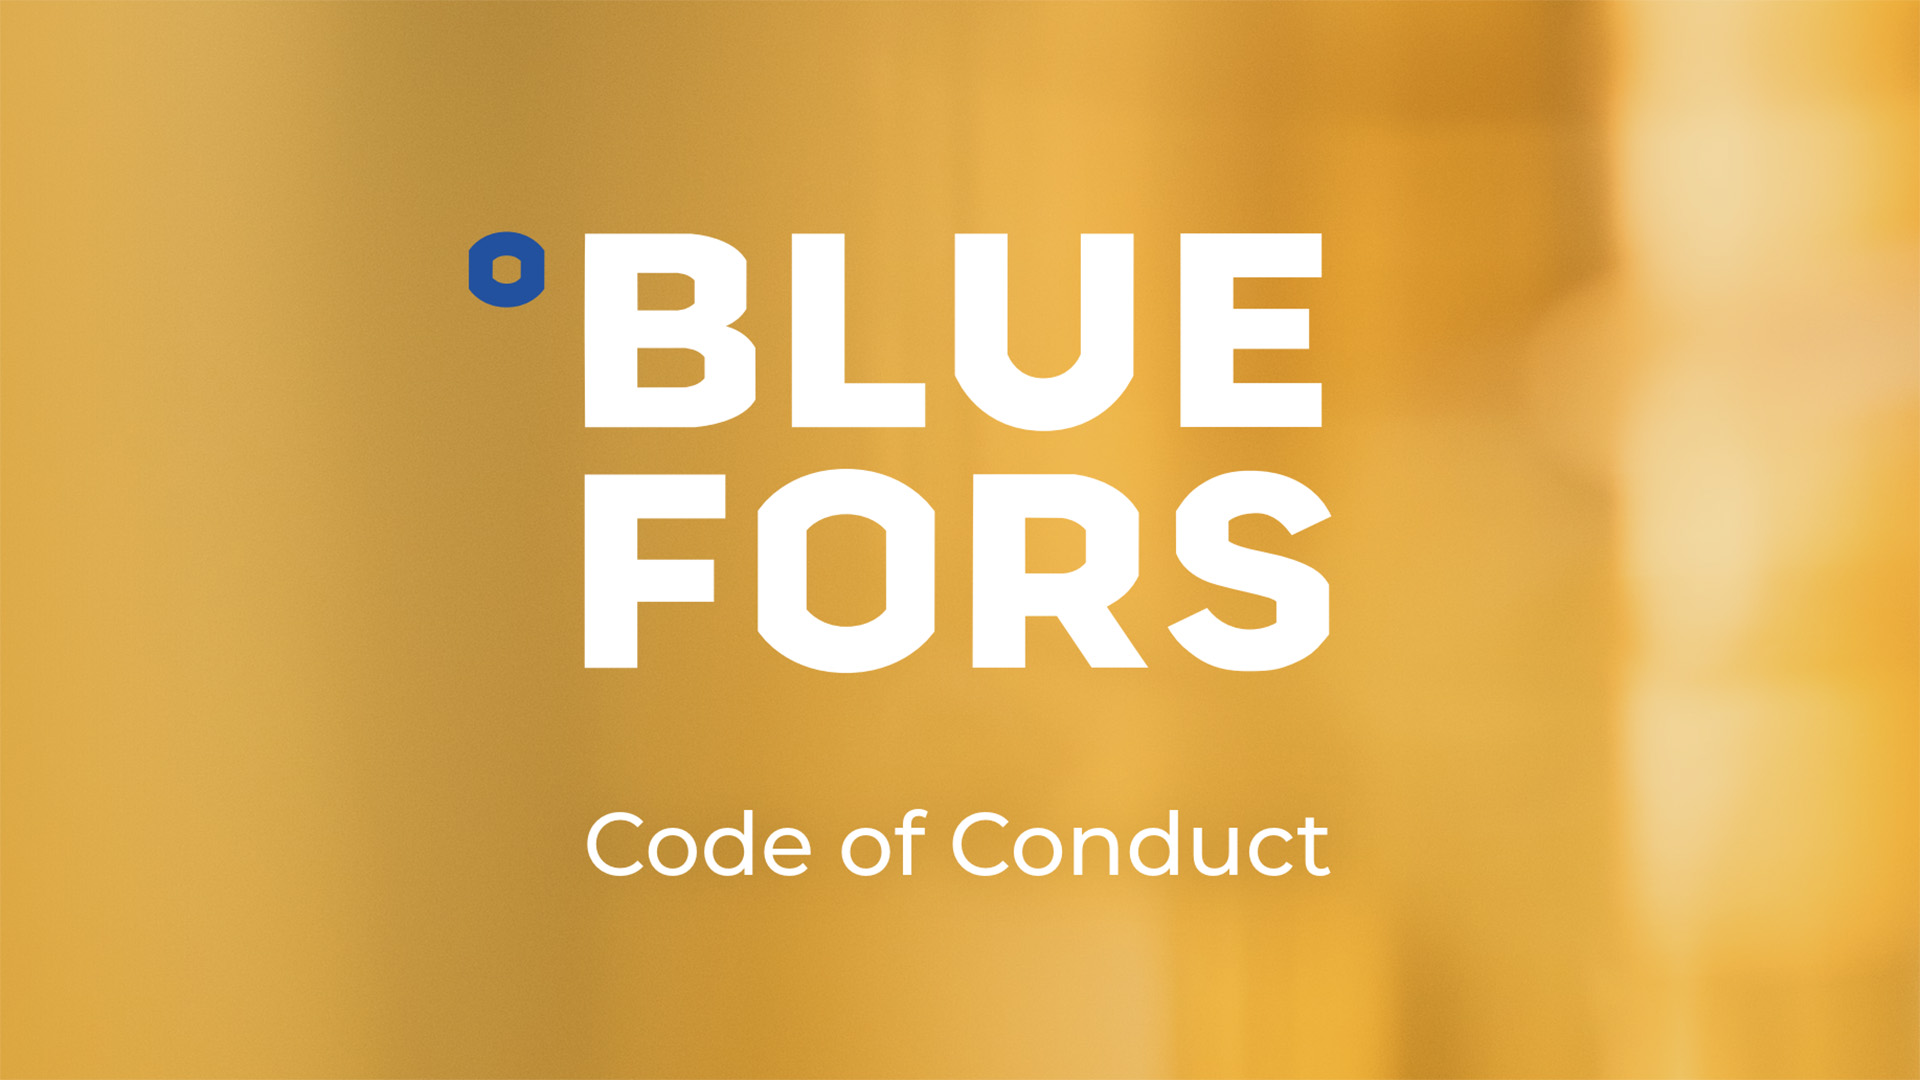 Bluefors Code of Conduct